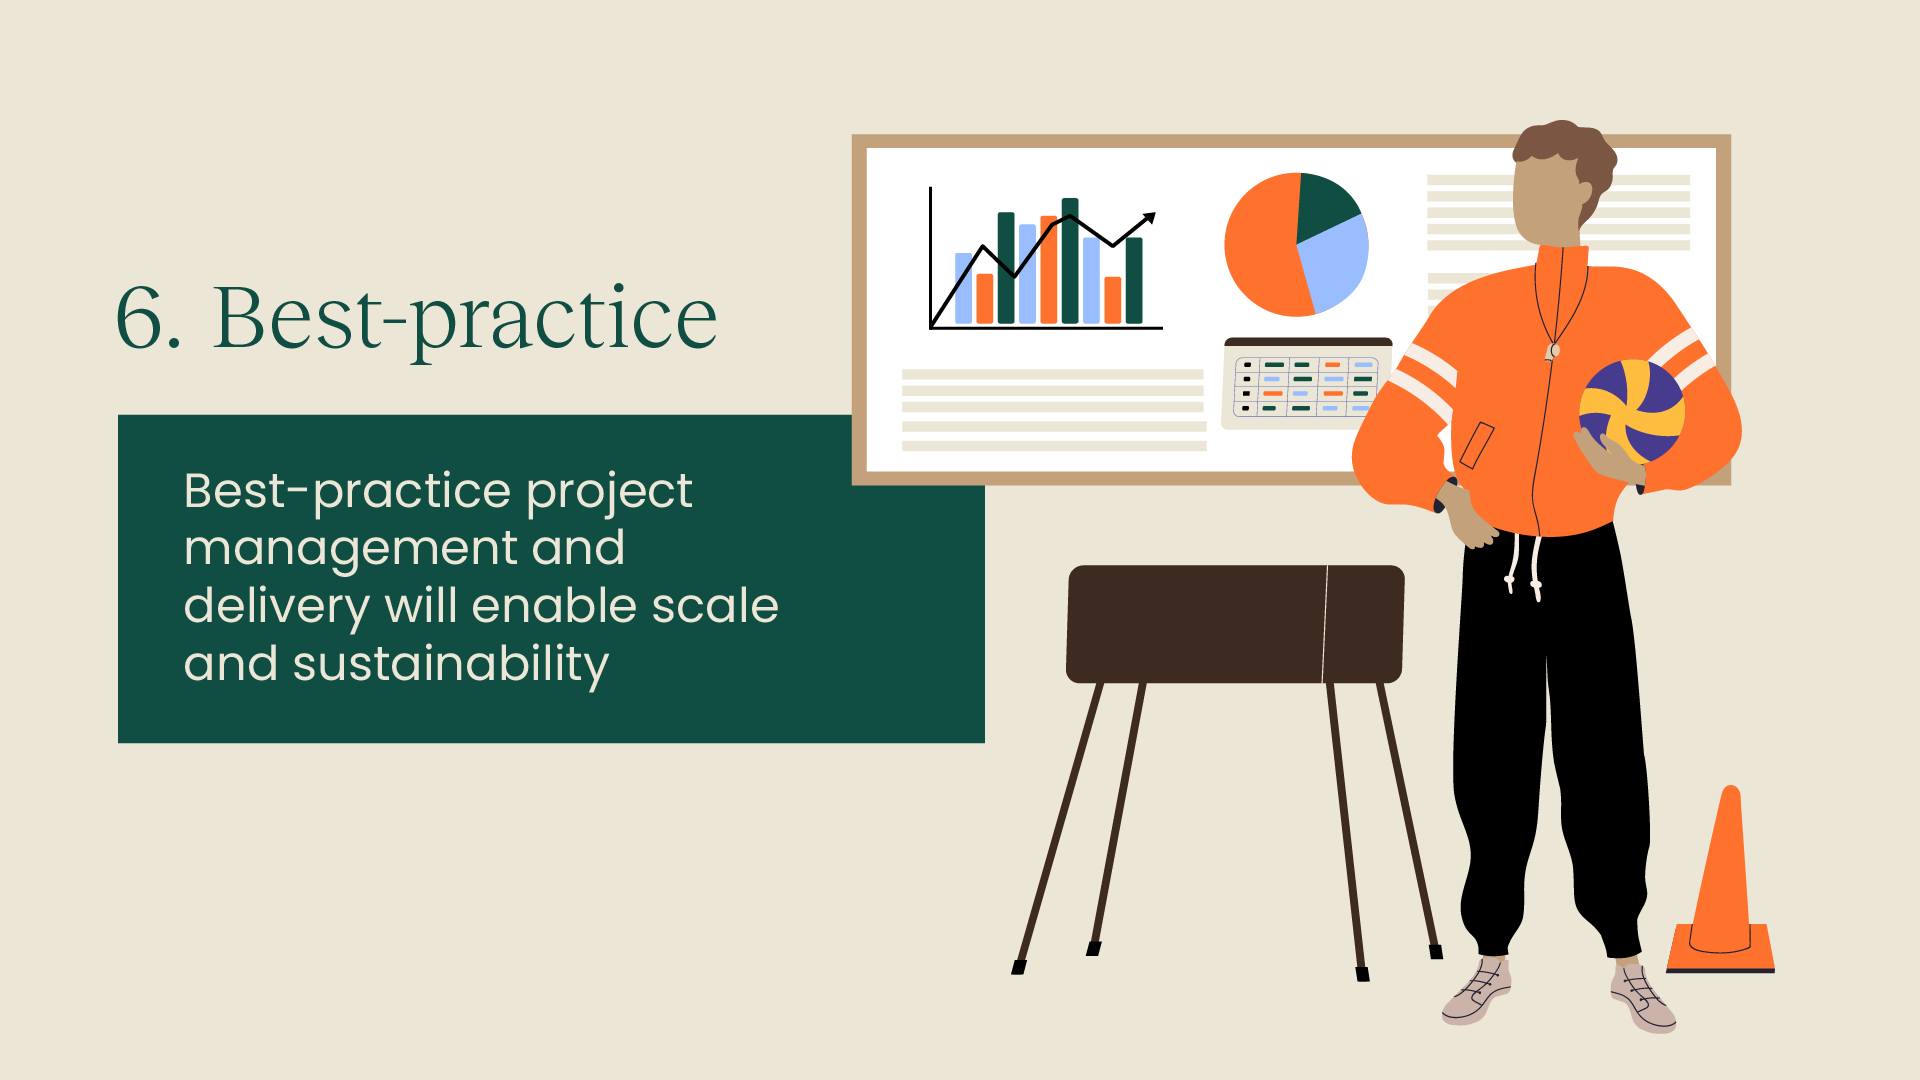 6 - Best-practice - Best-practice project management and delivery will enable scale and sustainability